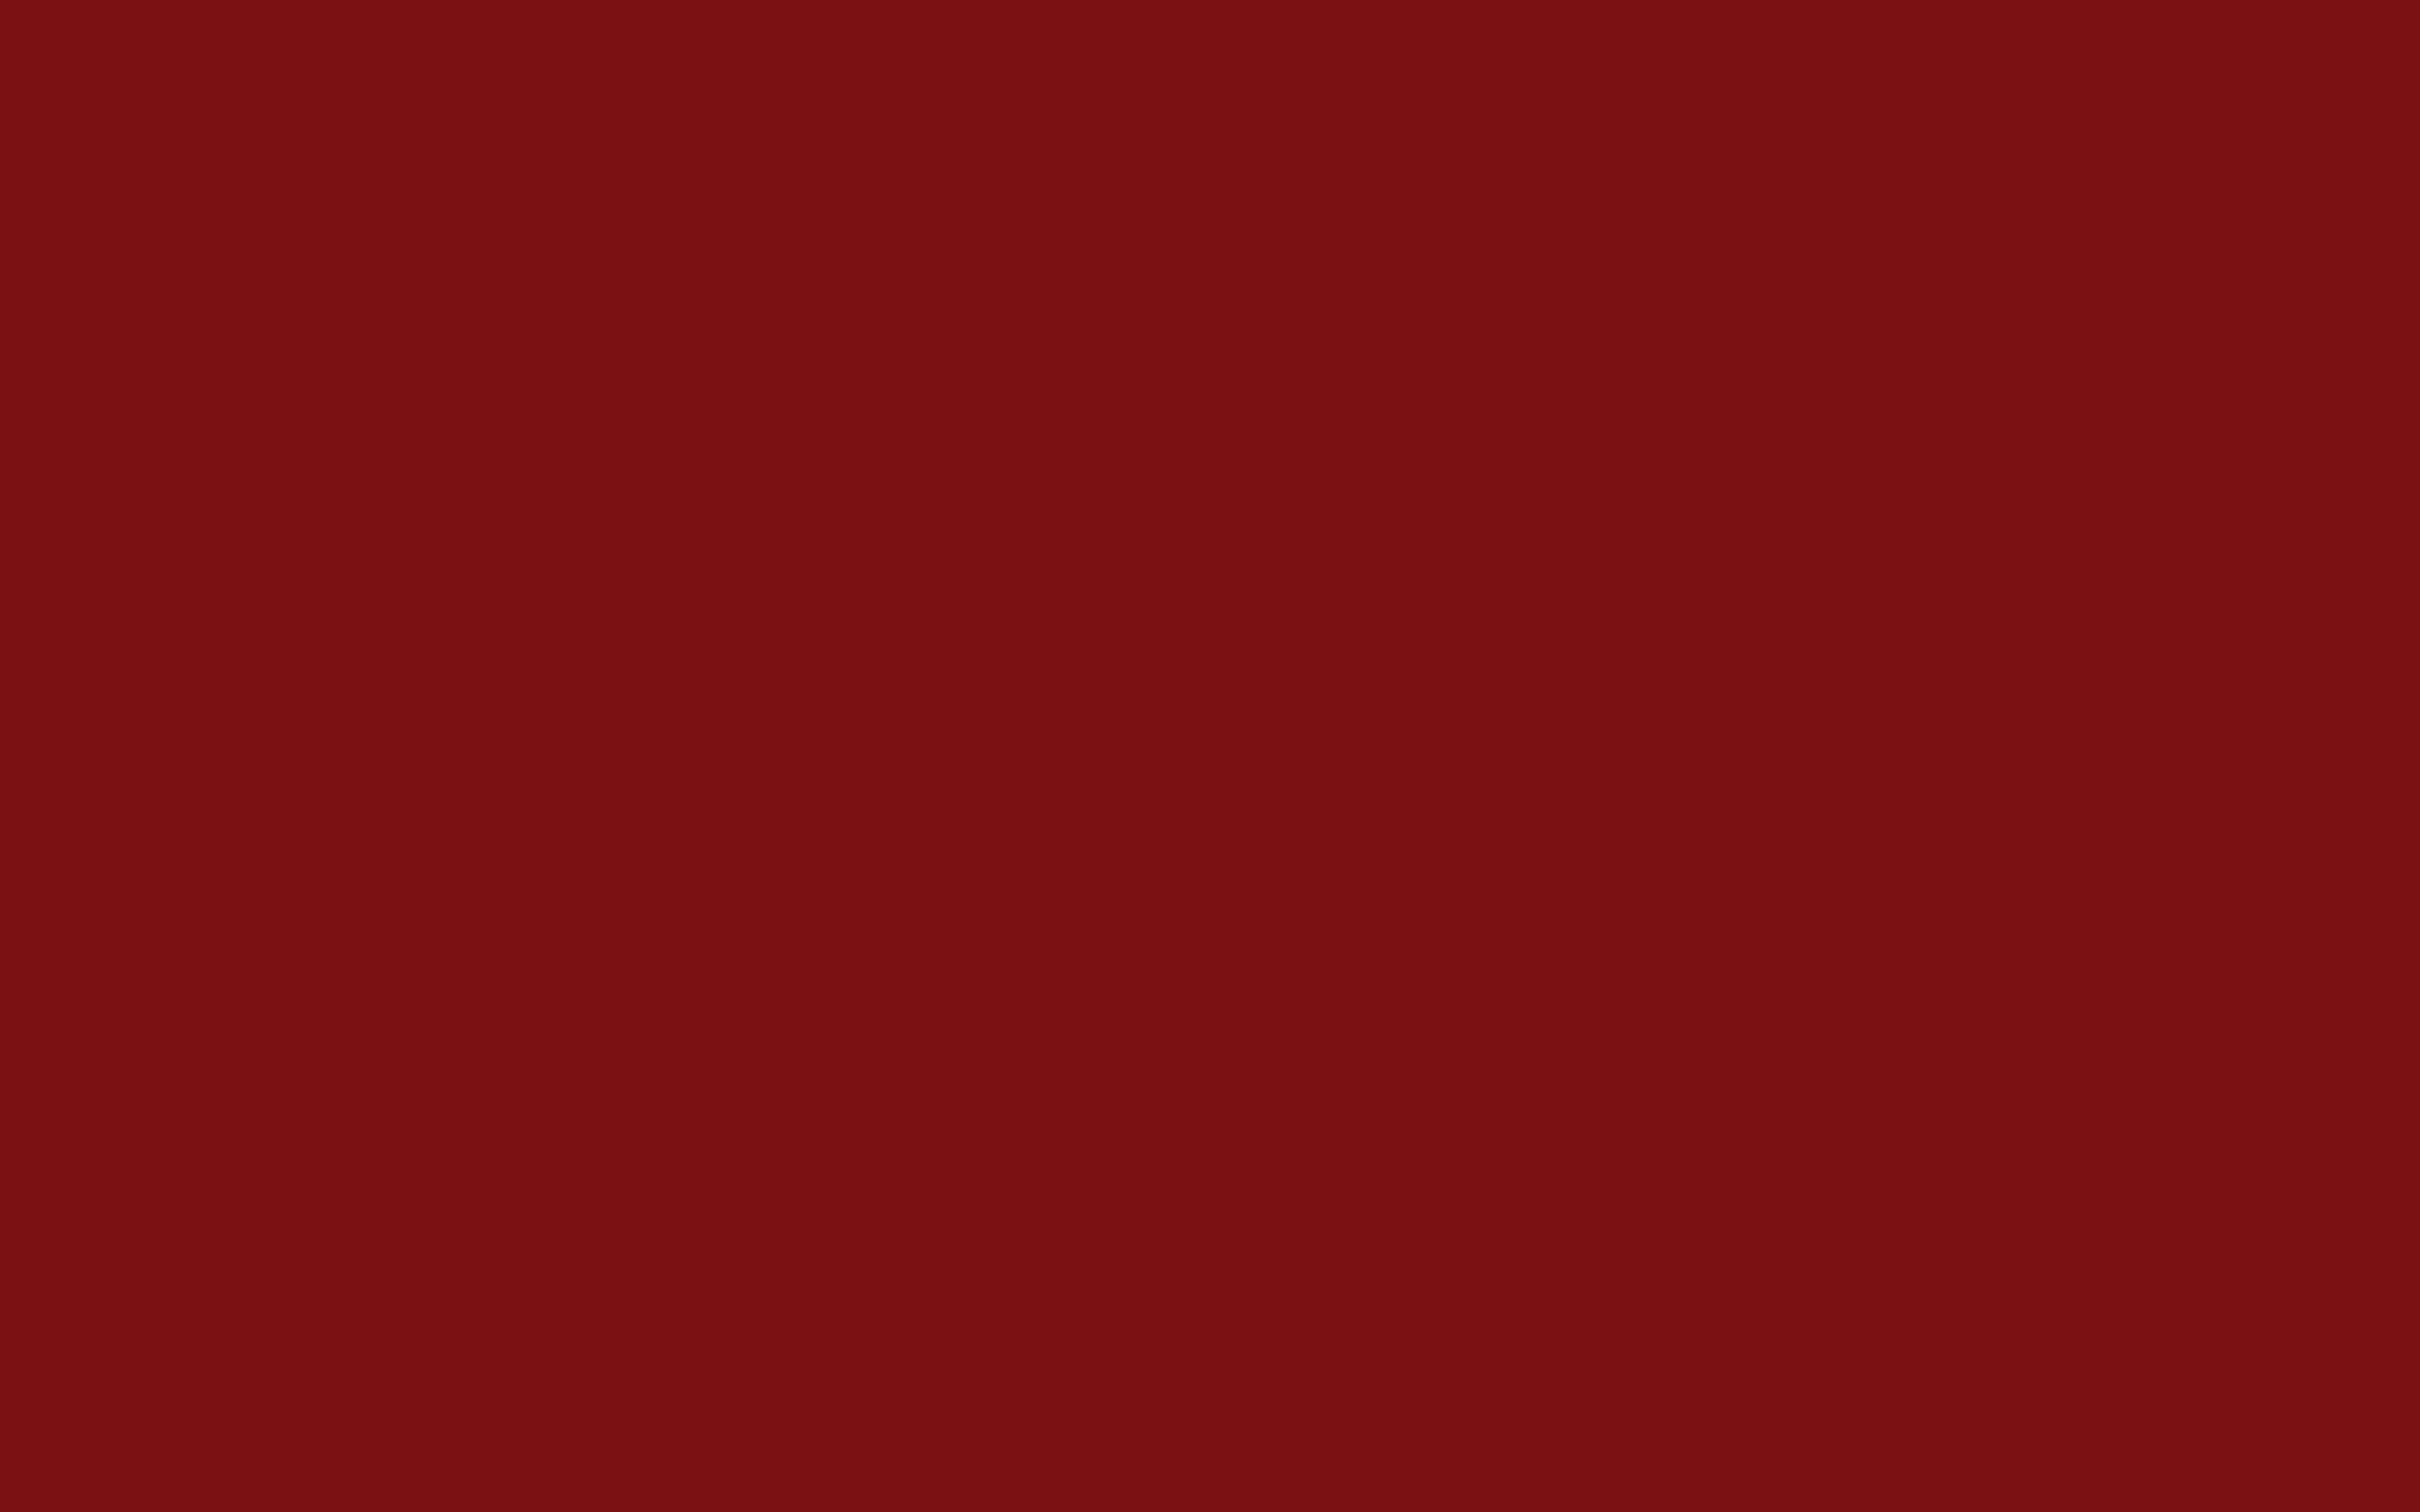 Solid Maroon Background Ing Gallery